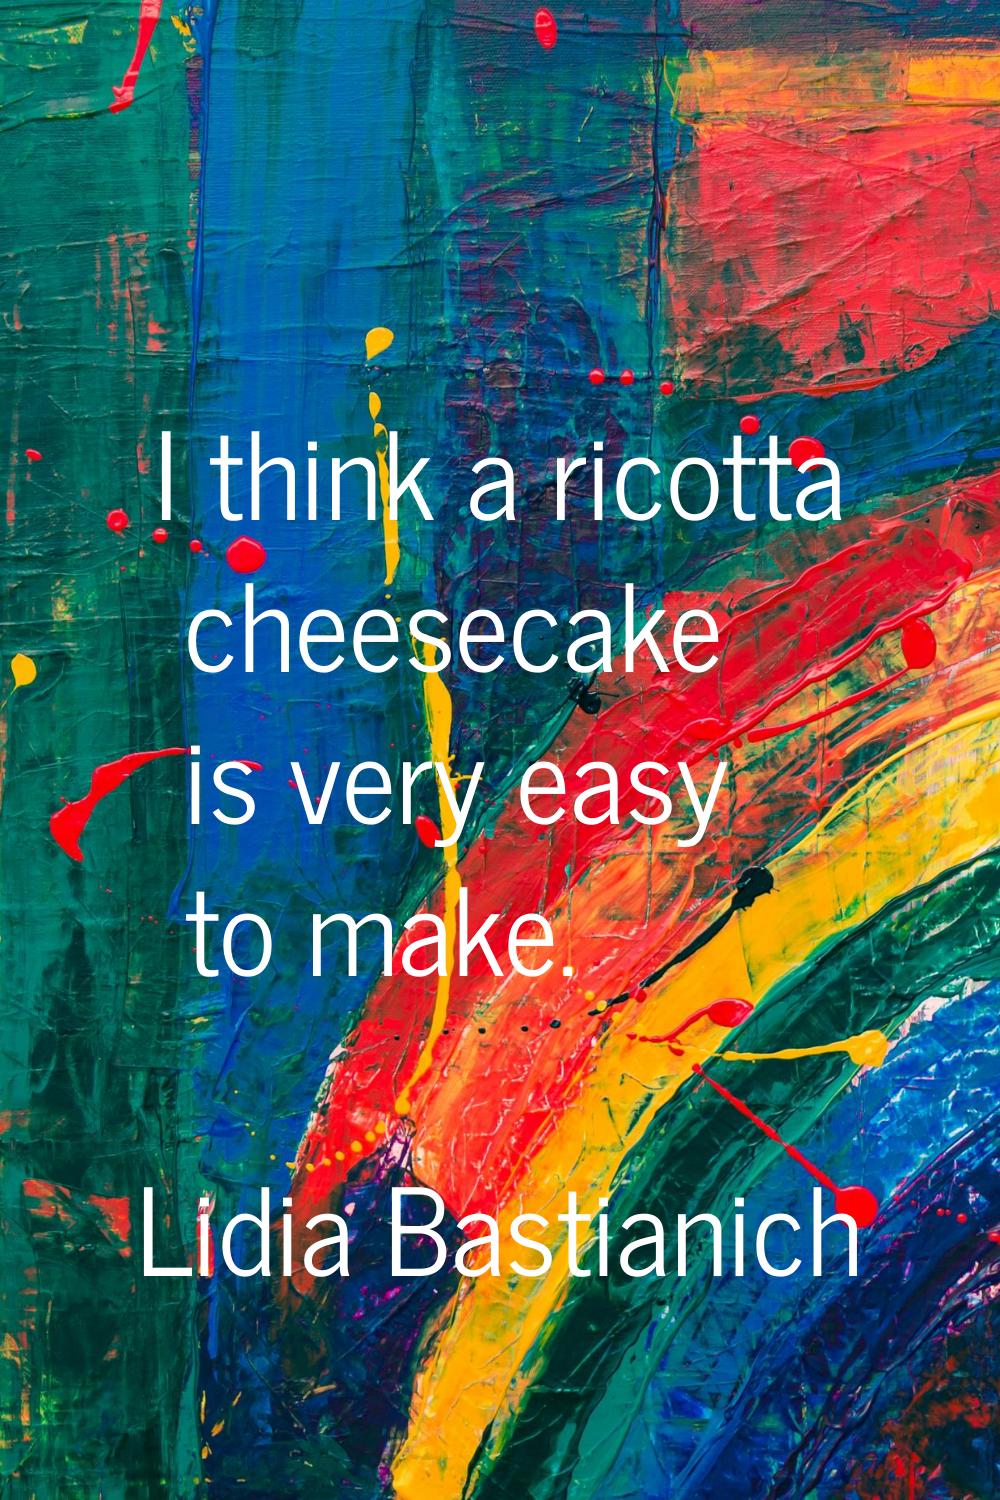 I think a ricotta cheesecake is very easy to make.